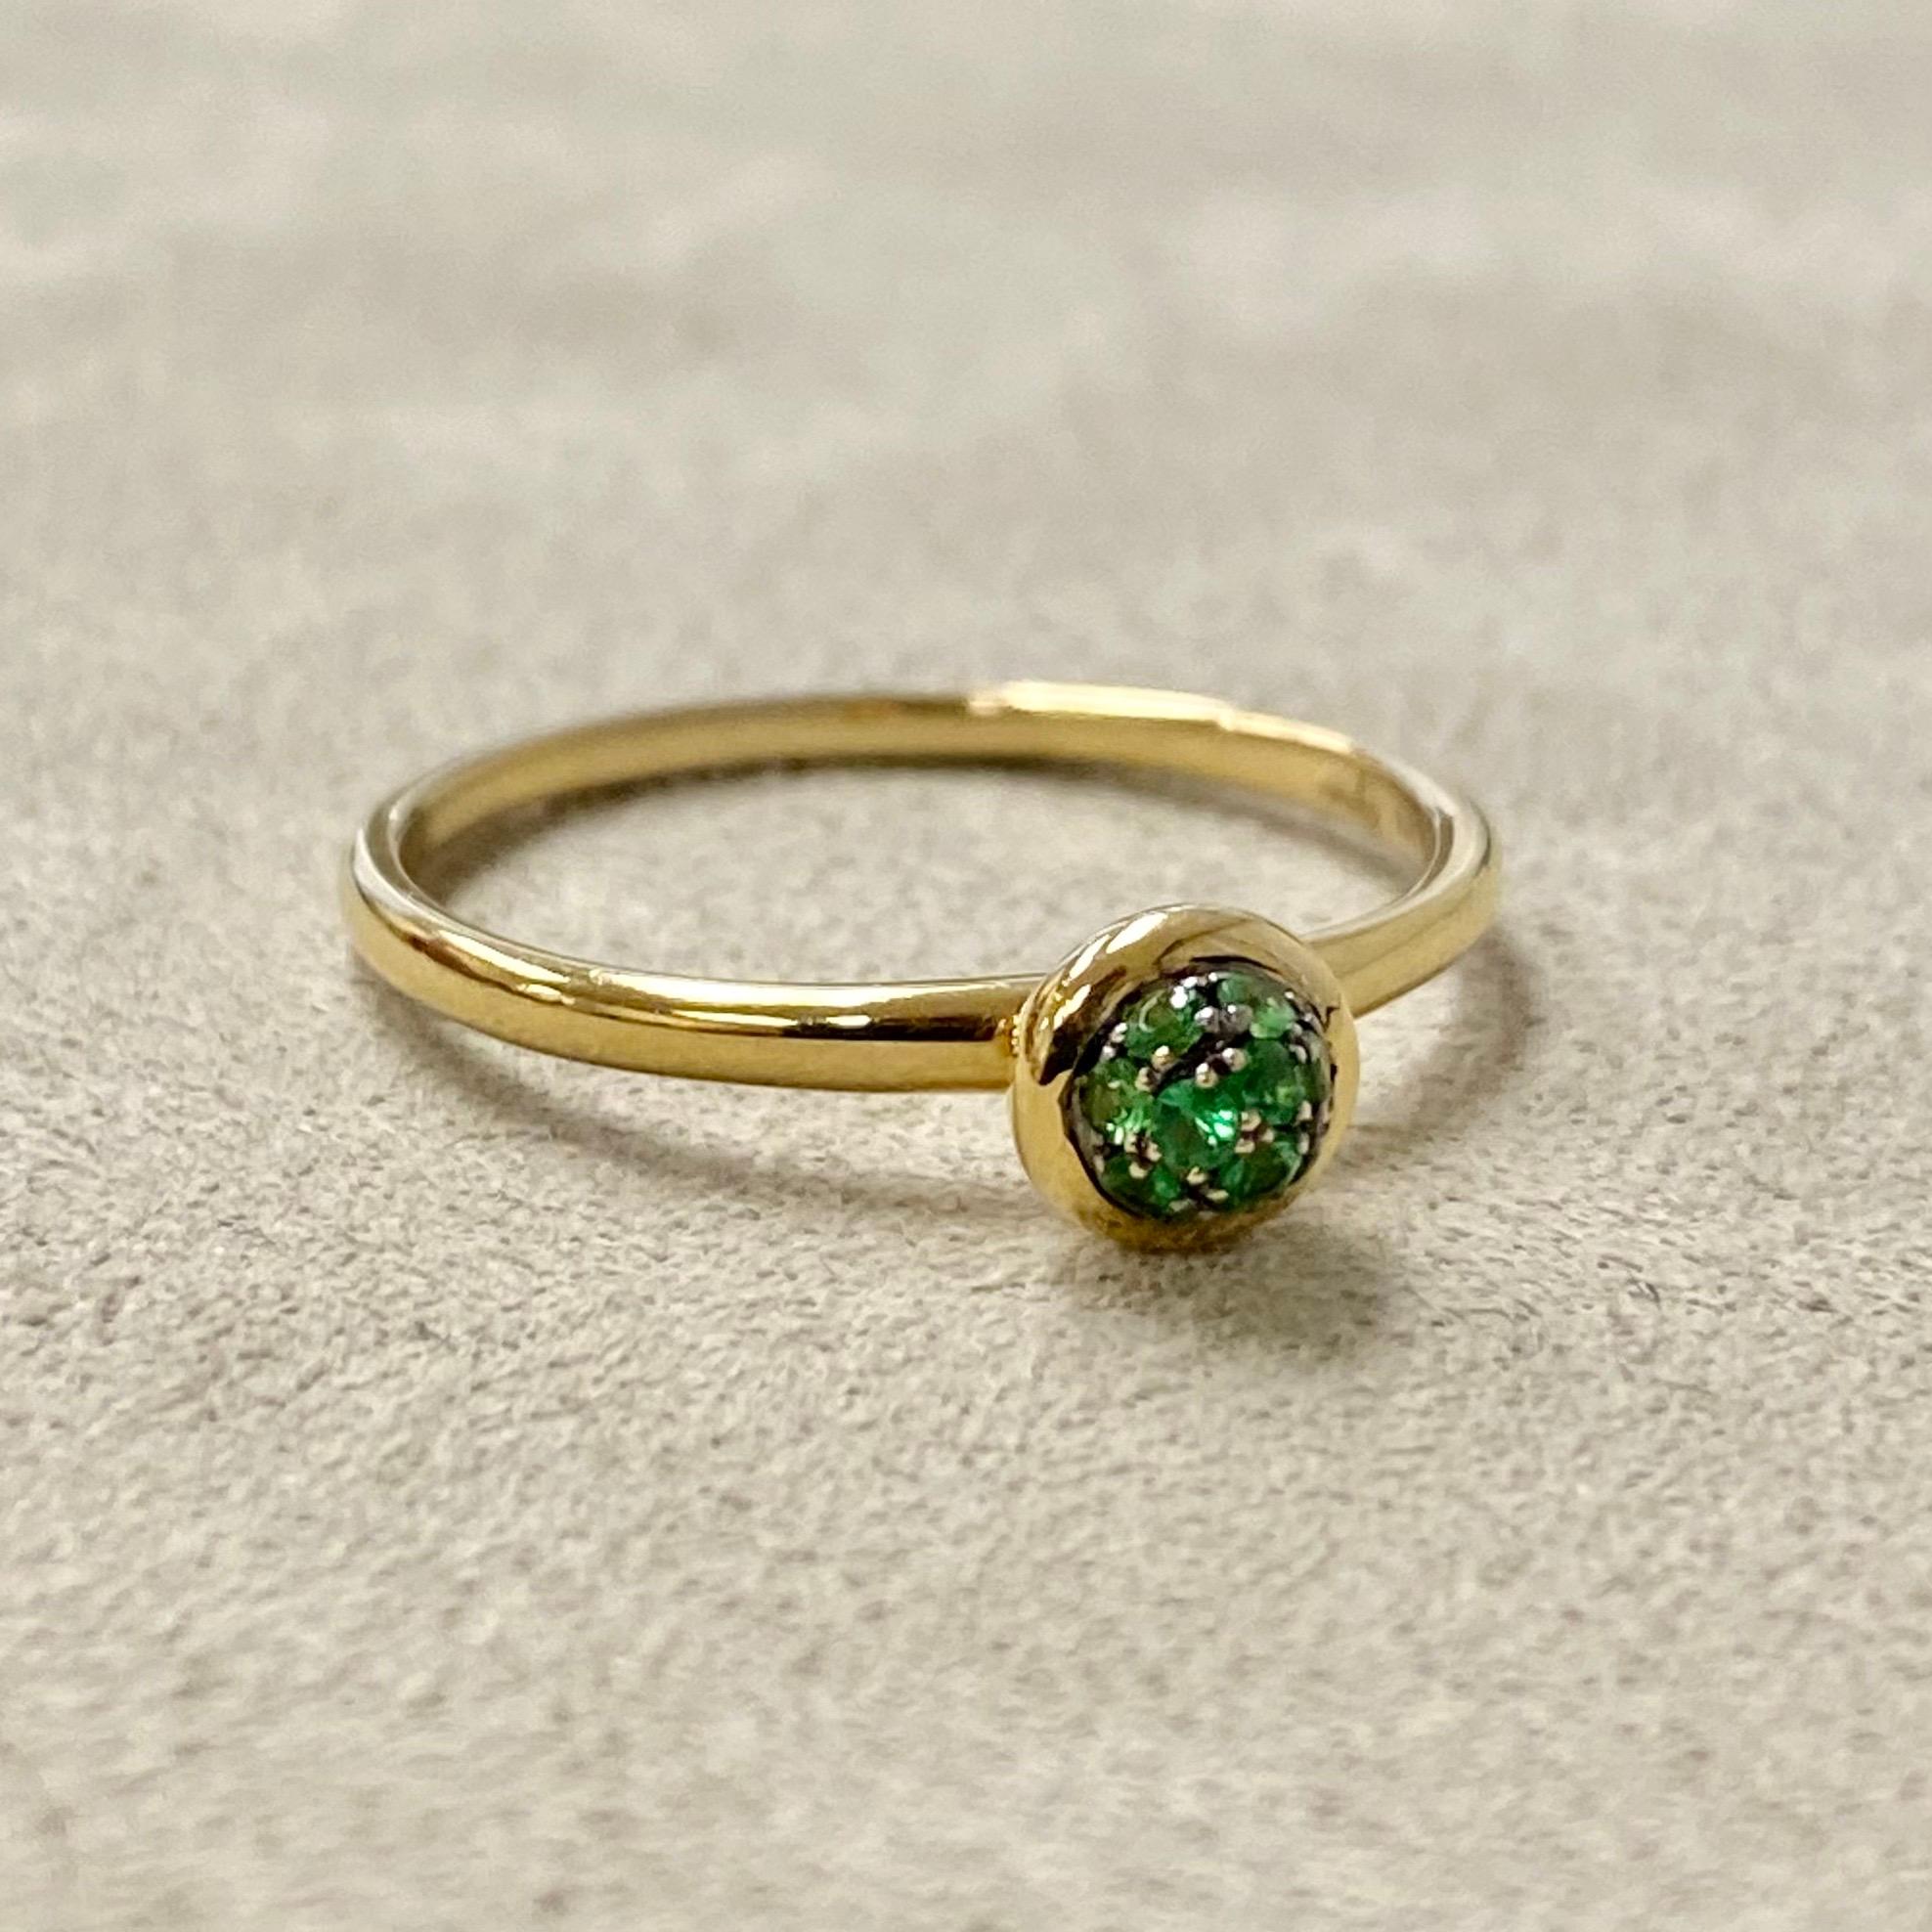 Created in 18 karat yellow gold
Tsavorite 0.10 carat approx.
Tsavorite pave ring 5 mm diameter approx.
Ring size US 6.5, can be sized upon request.


About the Designers ~ Dharmesh & Namrata

Drawing inspiration from little things, Dharmesh &